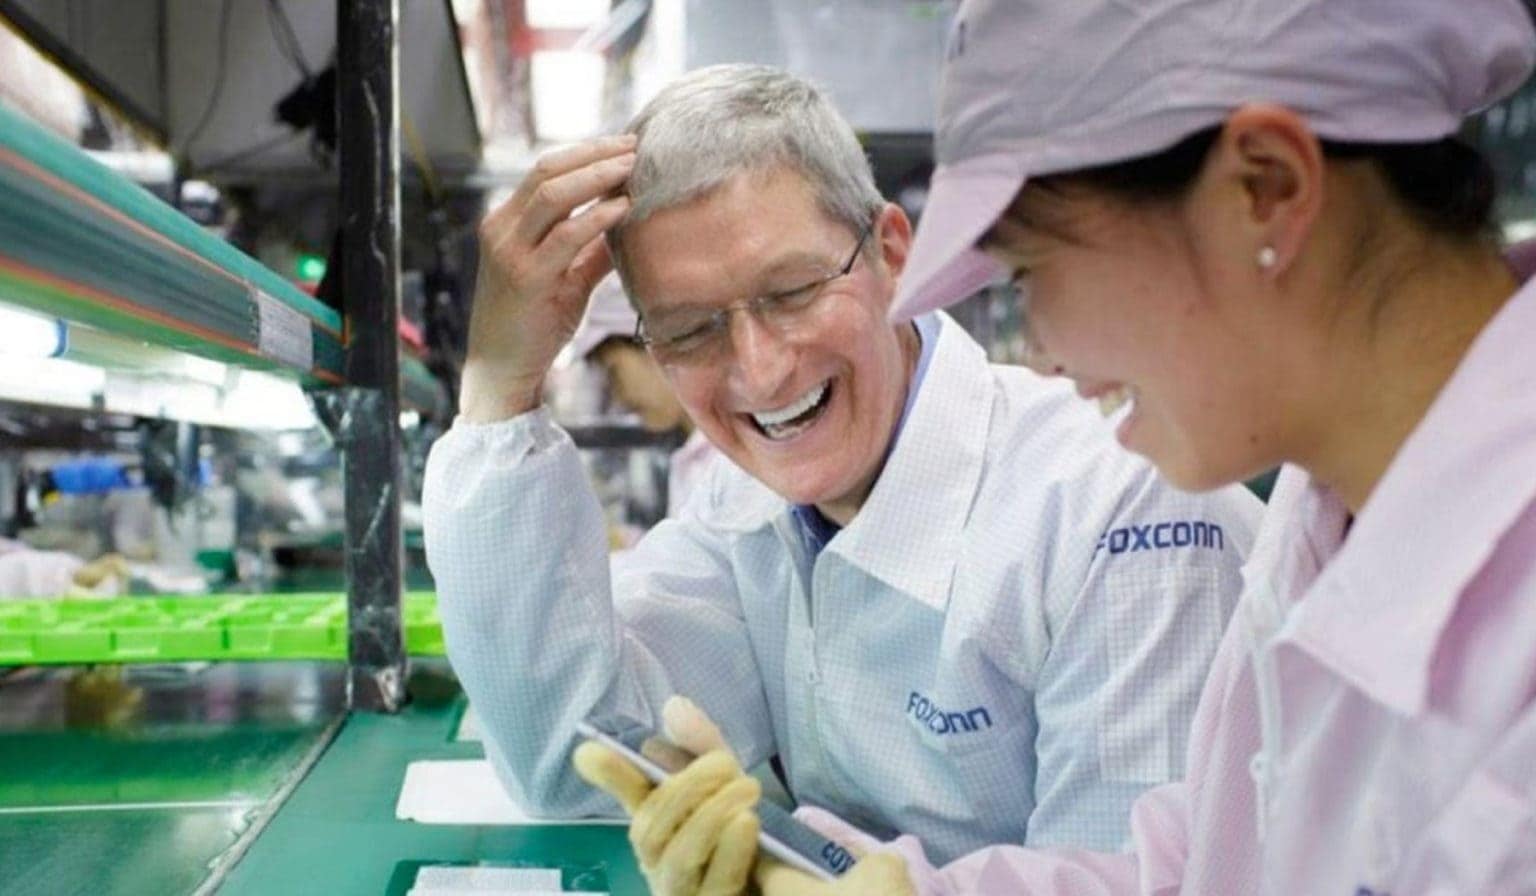 Apple CEO Tim Cook meets with a Foxconn worker on a previous occasion.